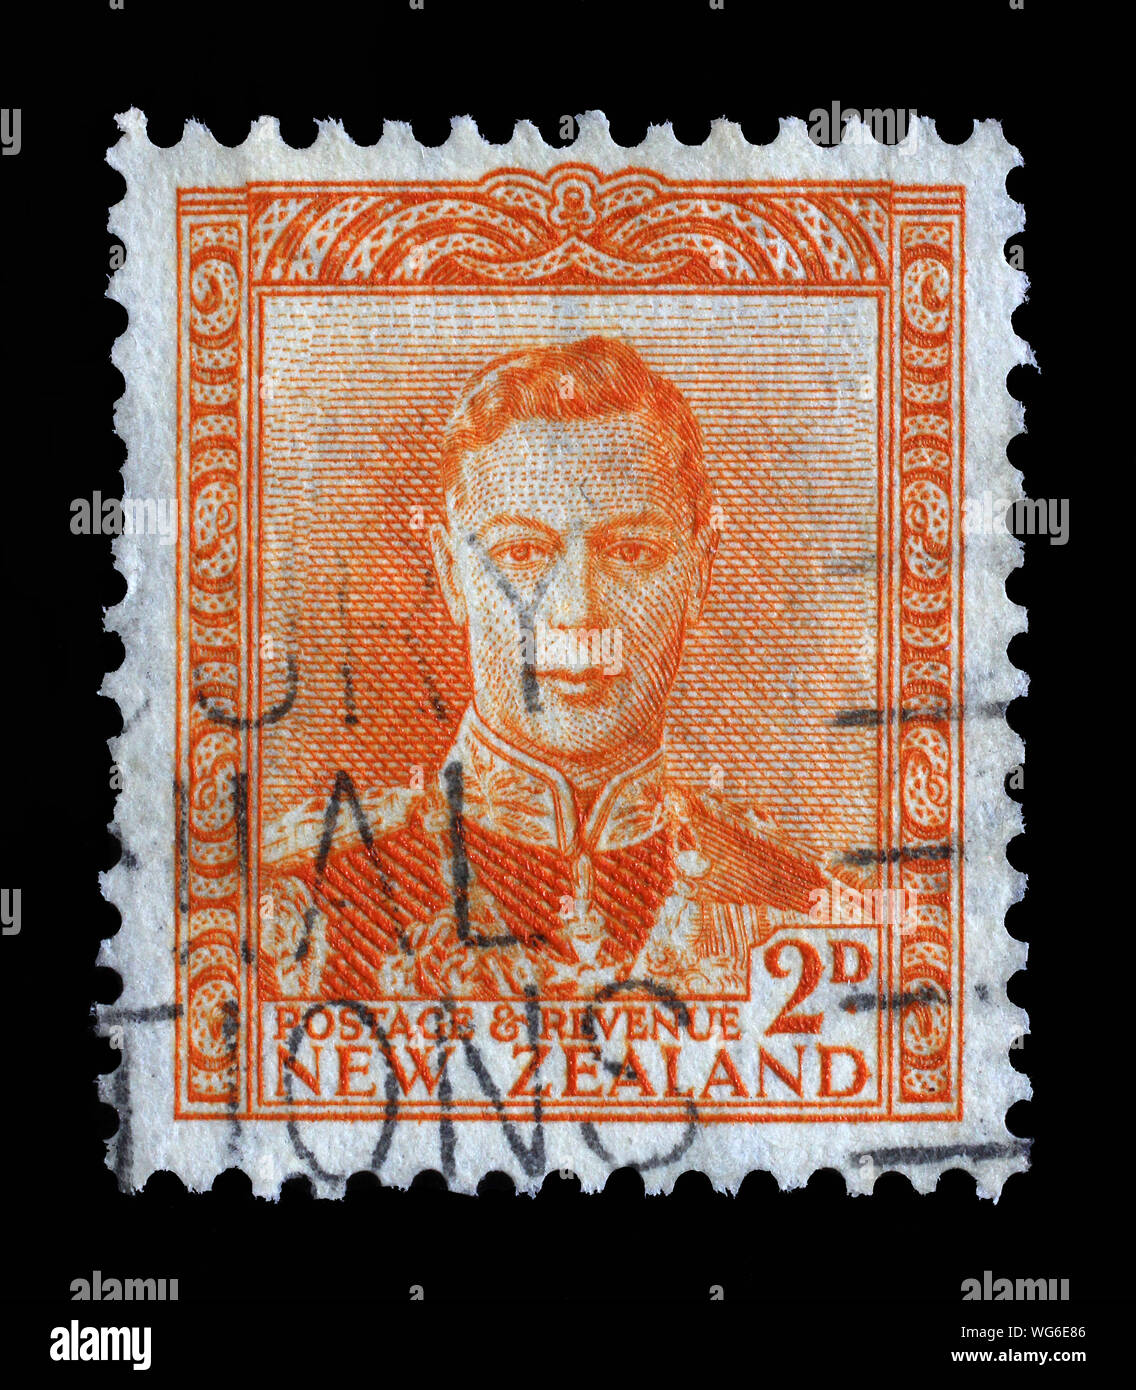 Stamp issued in New Zealand shows King George VI, circa 1947. Stock Photo